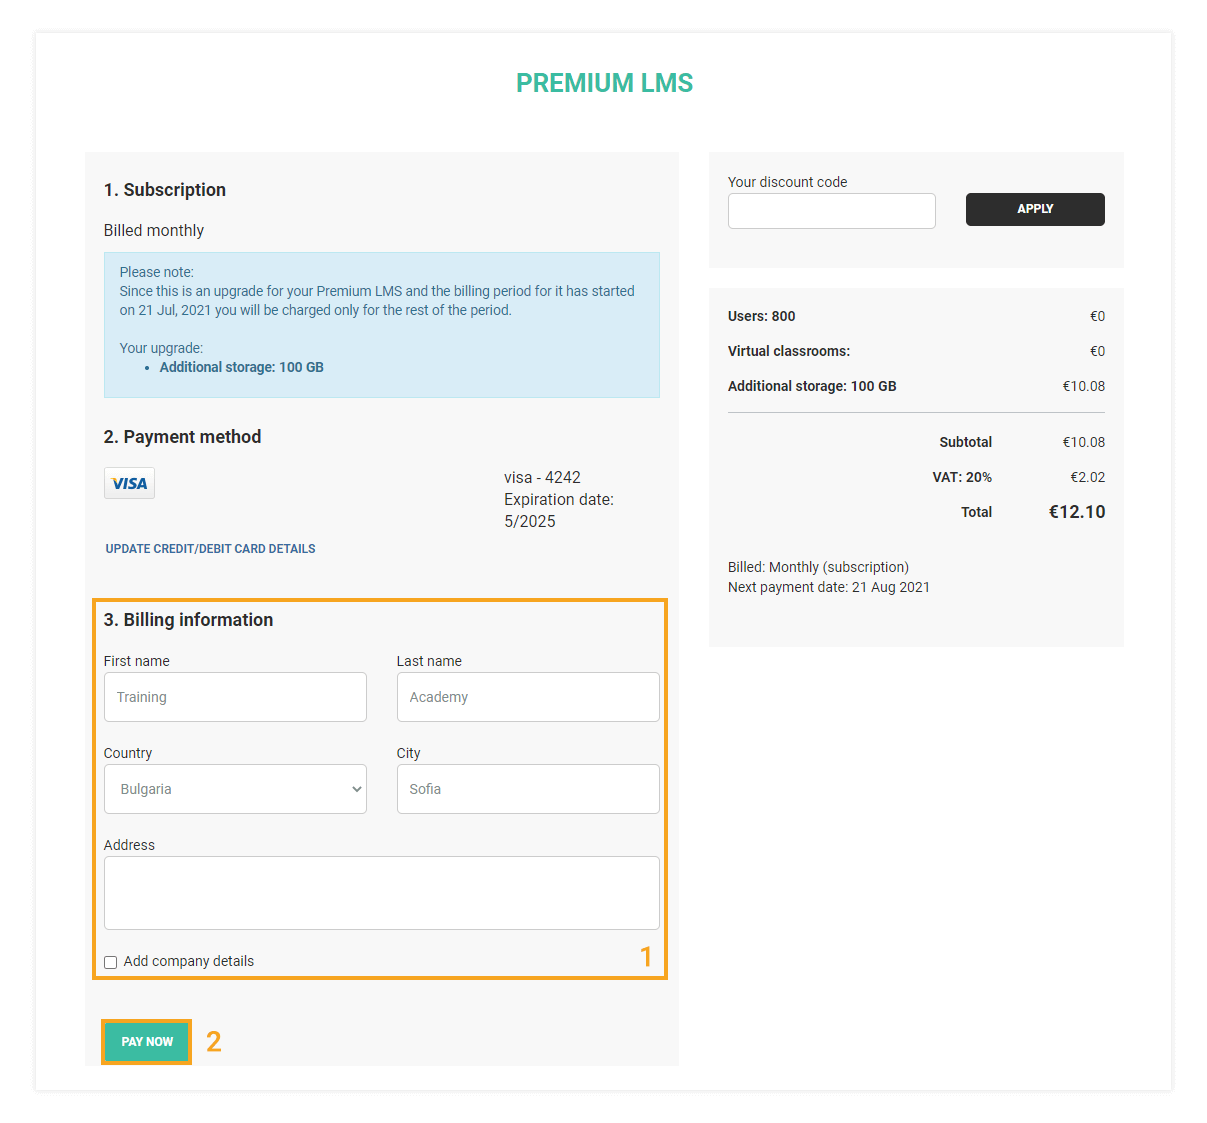 LMS Billing and Upgrade: Use the Add company details in case you need to do so and click complete purchase to finish the LMS billing and upgrade process